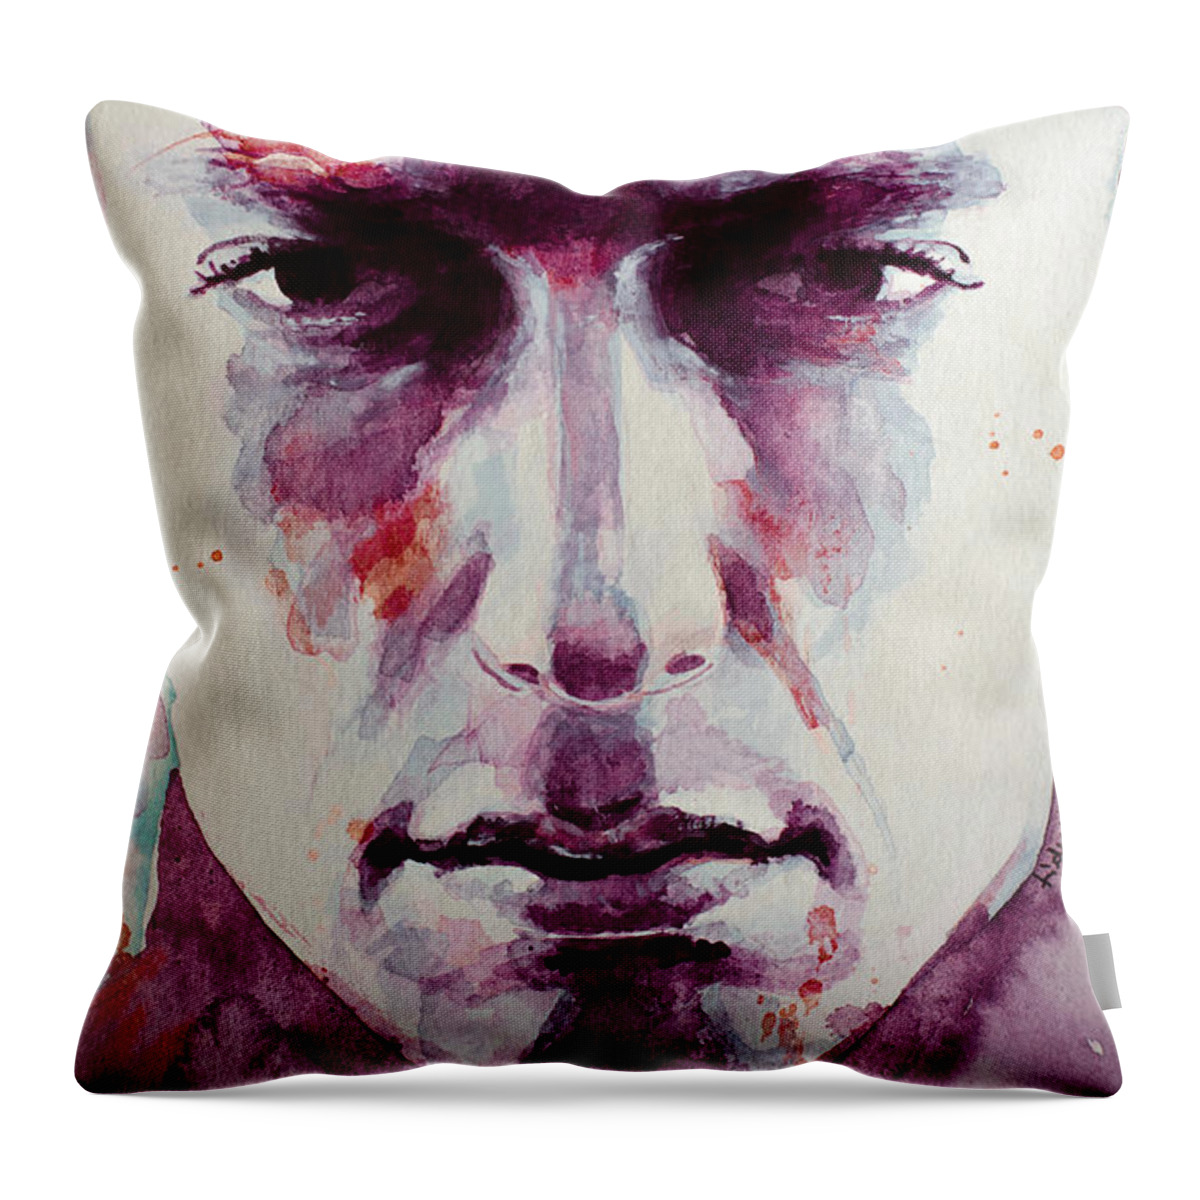 Eminem Throw Pillow featuring the painting Eminem 2 by Laur Iduc